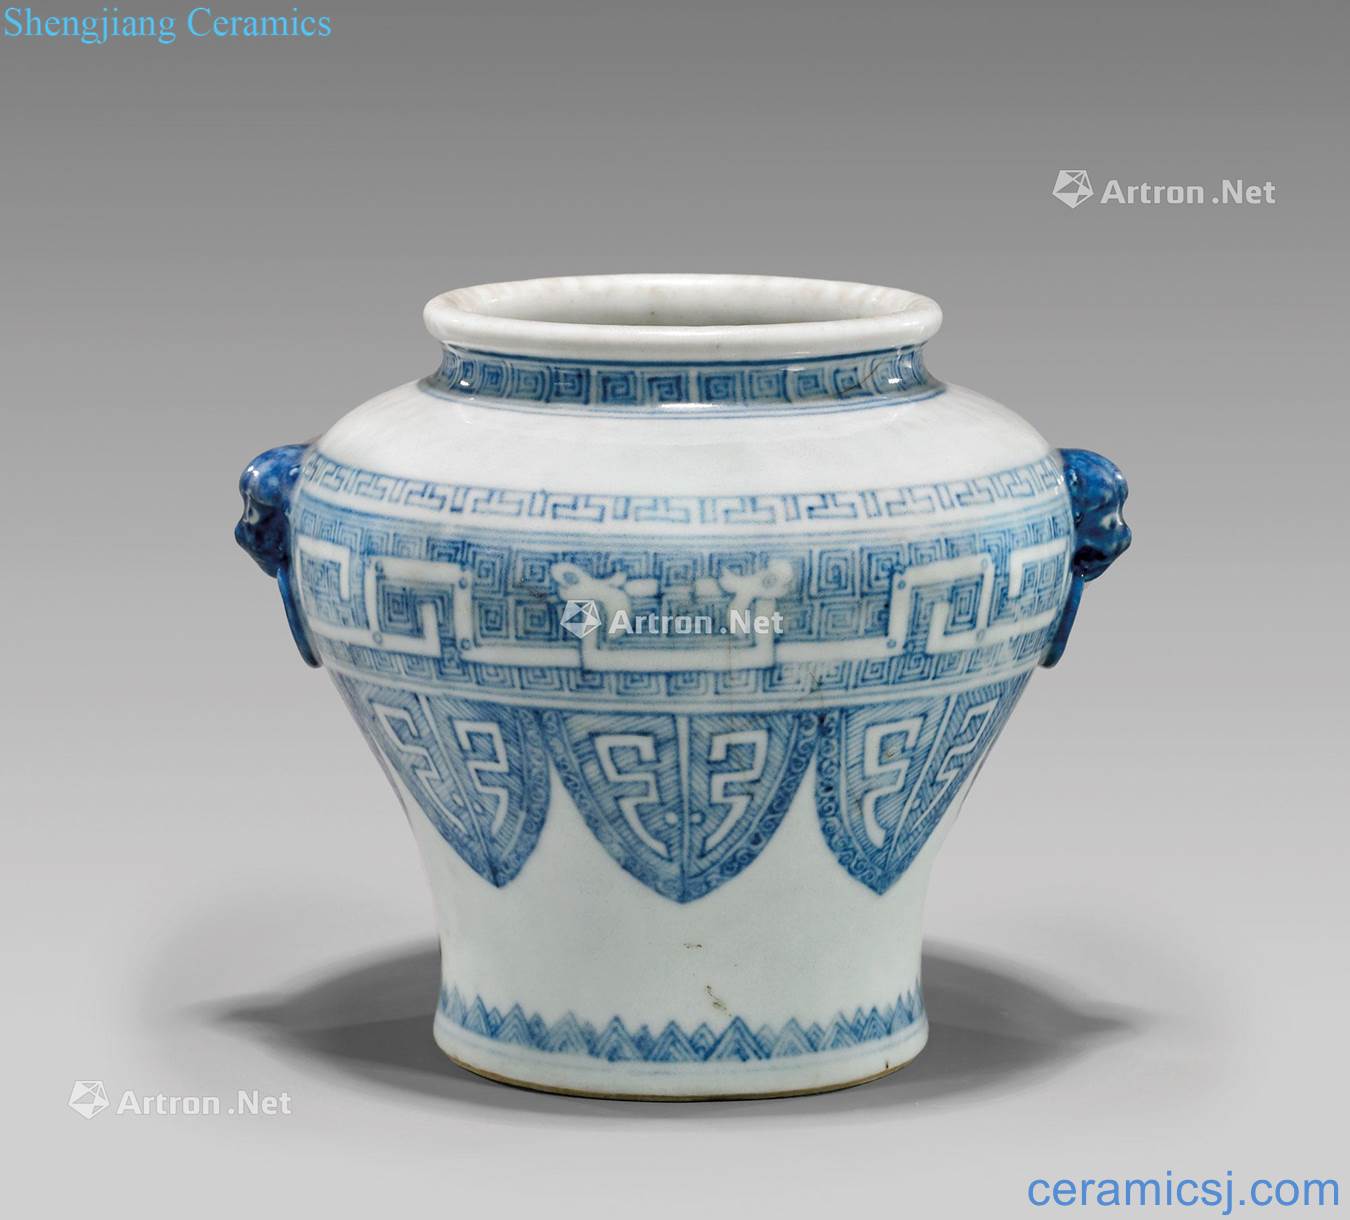 In the eighteenth century Antique blue and white porcelain jar